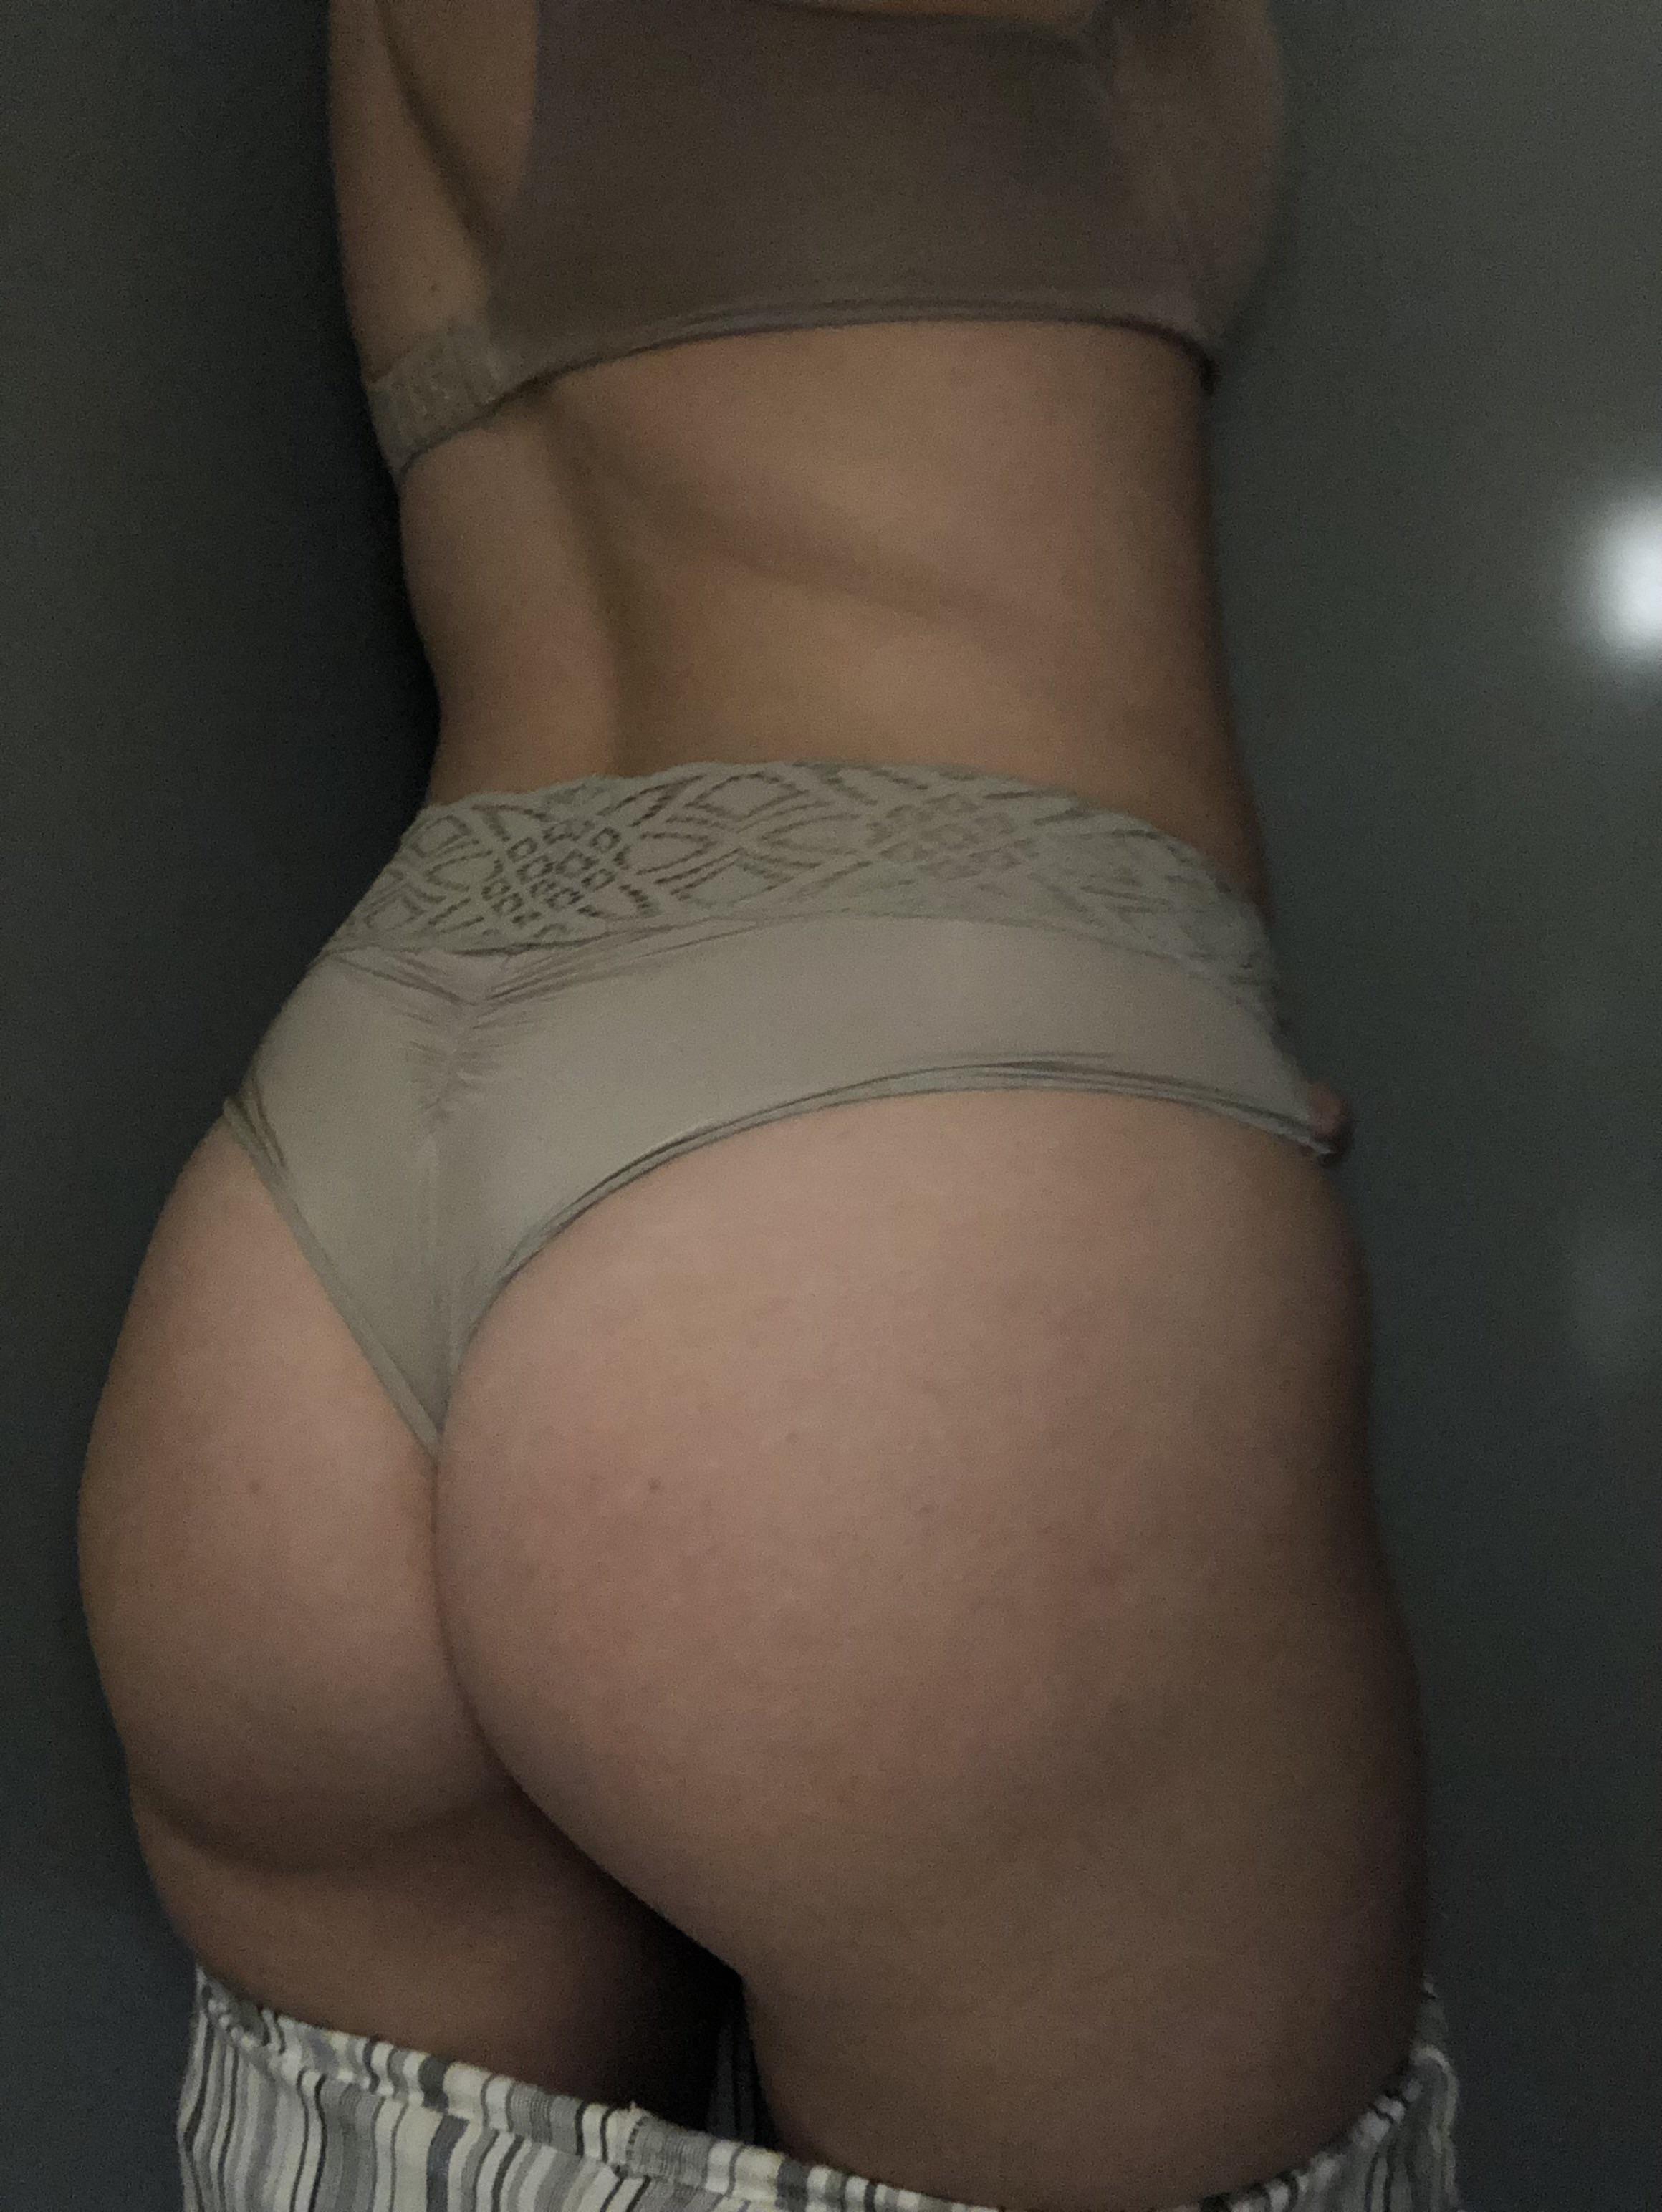 [F] My hubby swears that this subreddit would love this photo I took at the office today. Caught my boss checking out my ass so many times it started to make me wet